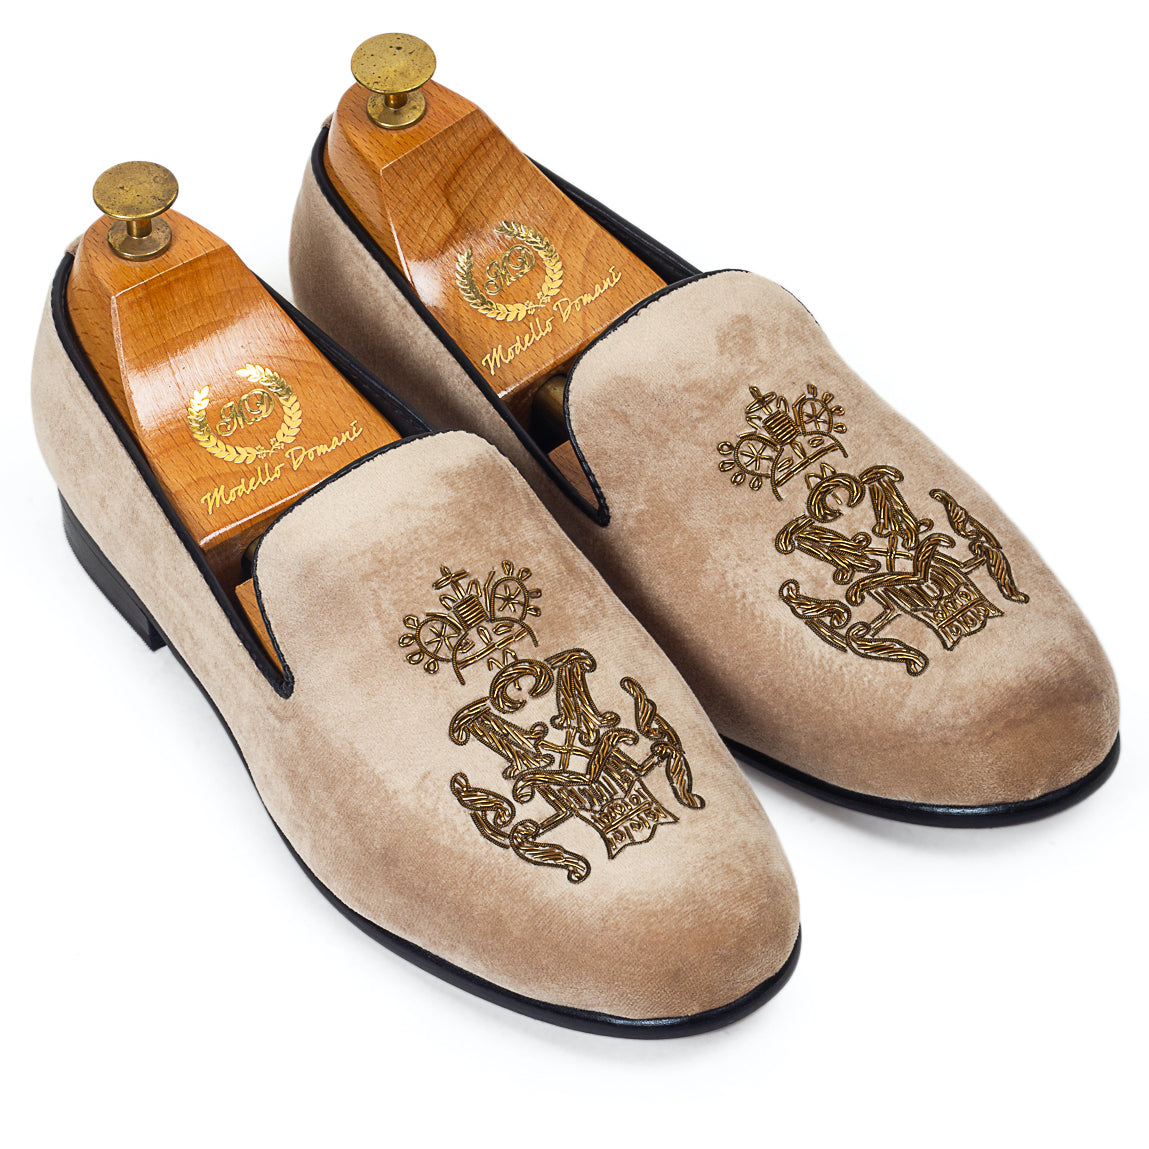 The Imperial Slipons (Beige - Limited Edition)